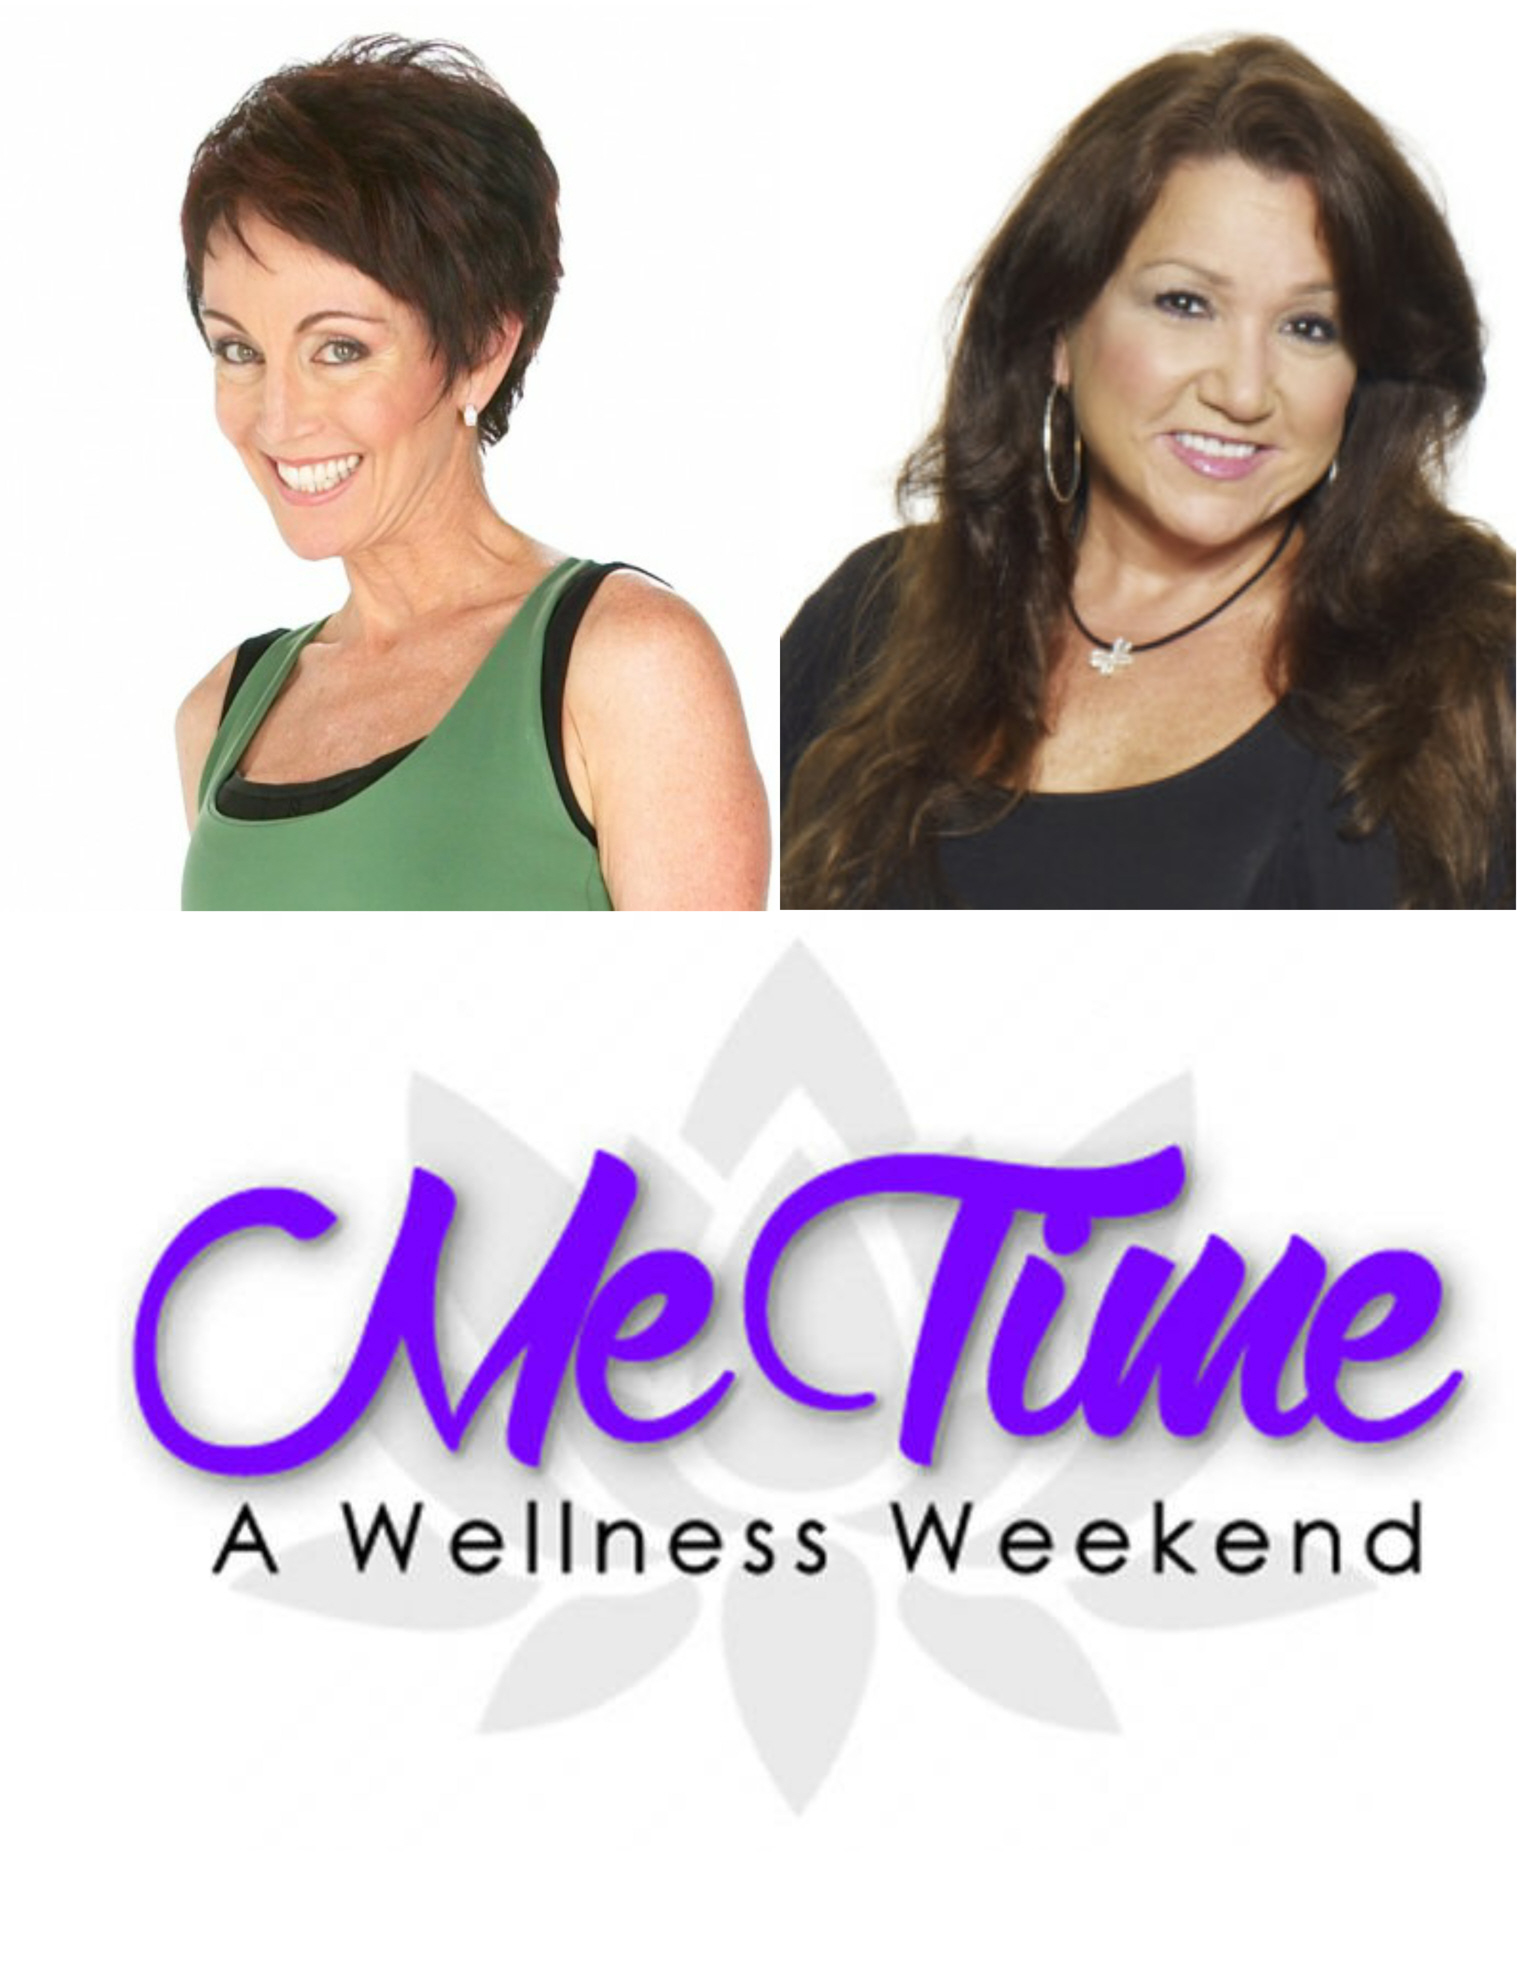 Fitness guru Teresa Tapp and NY Times Bestselling Author and Hormone Advocate Mary Shomon are two of the presenters at the Me Time Wellness Weekend